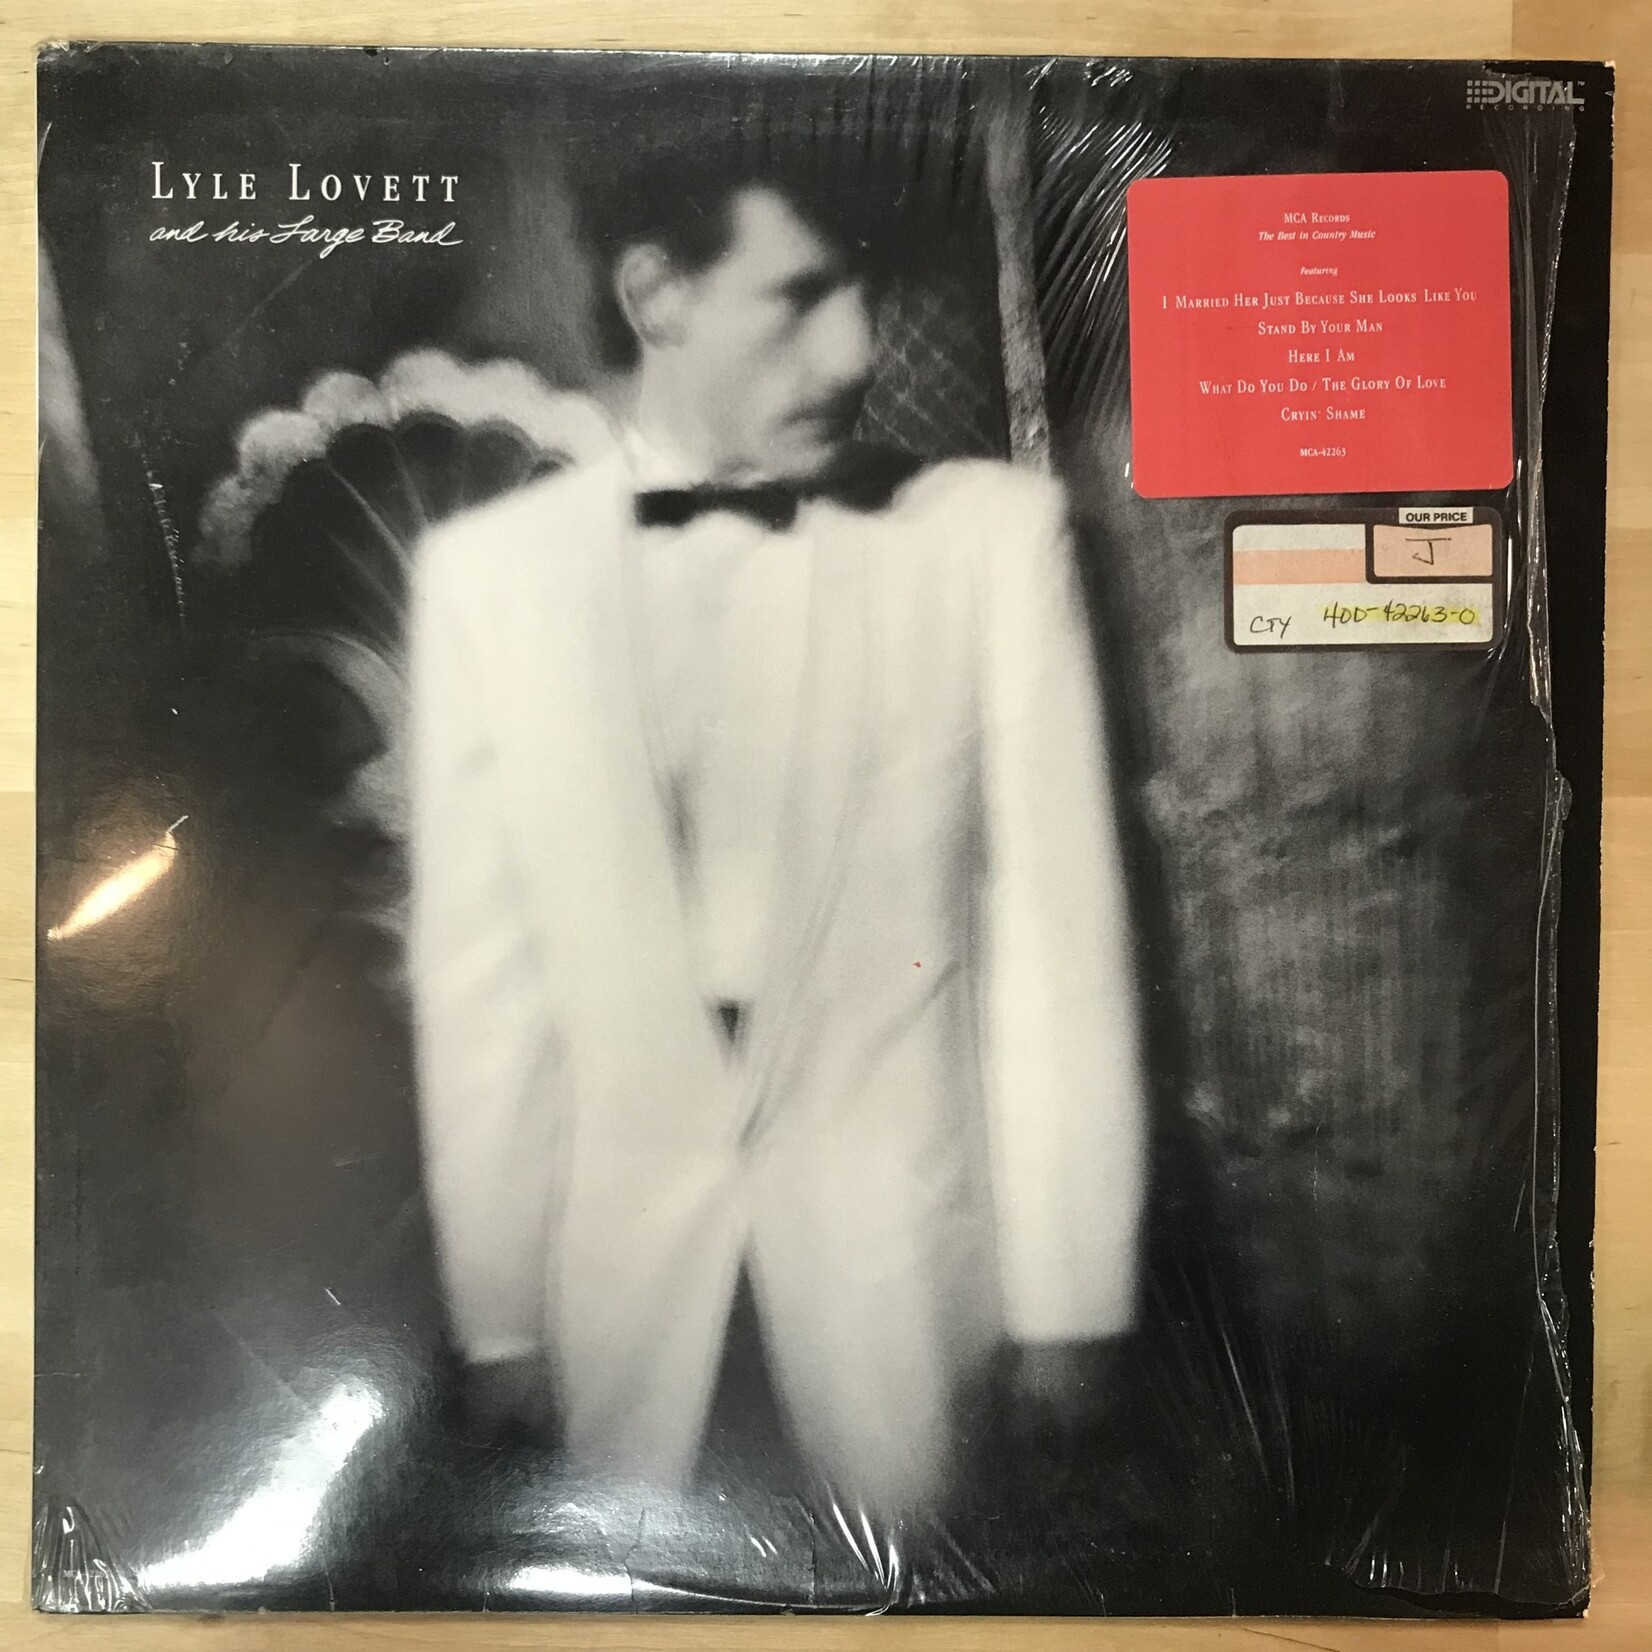 Lyle Lovett - And His Large Band - MCA 42263 - Vinyl LP (USED)